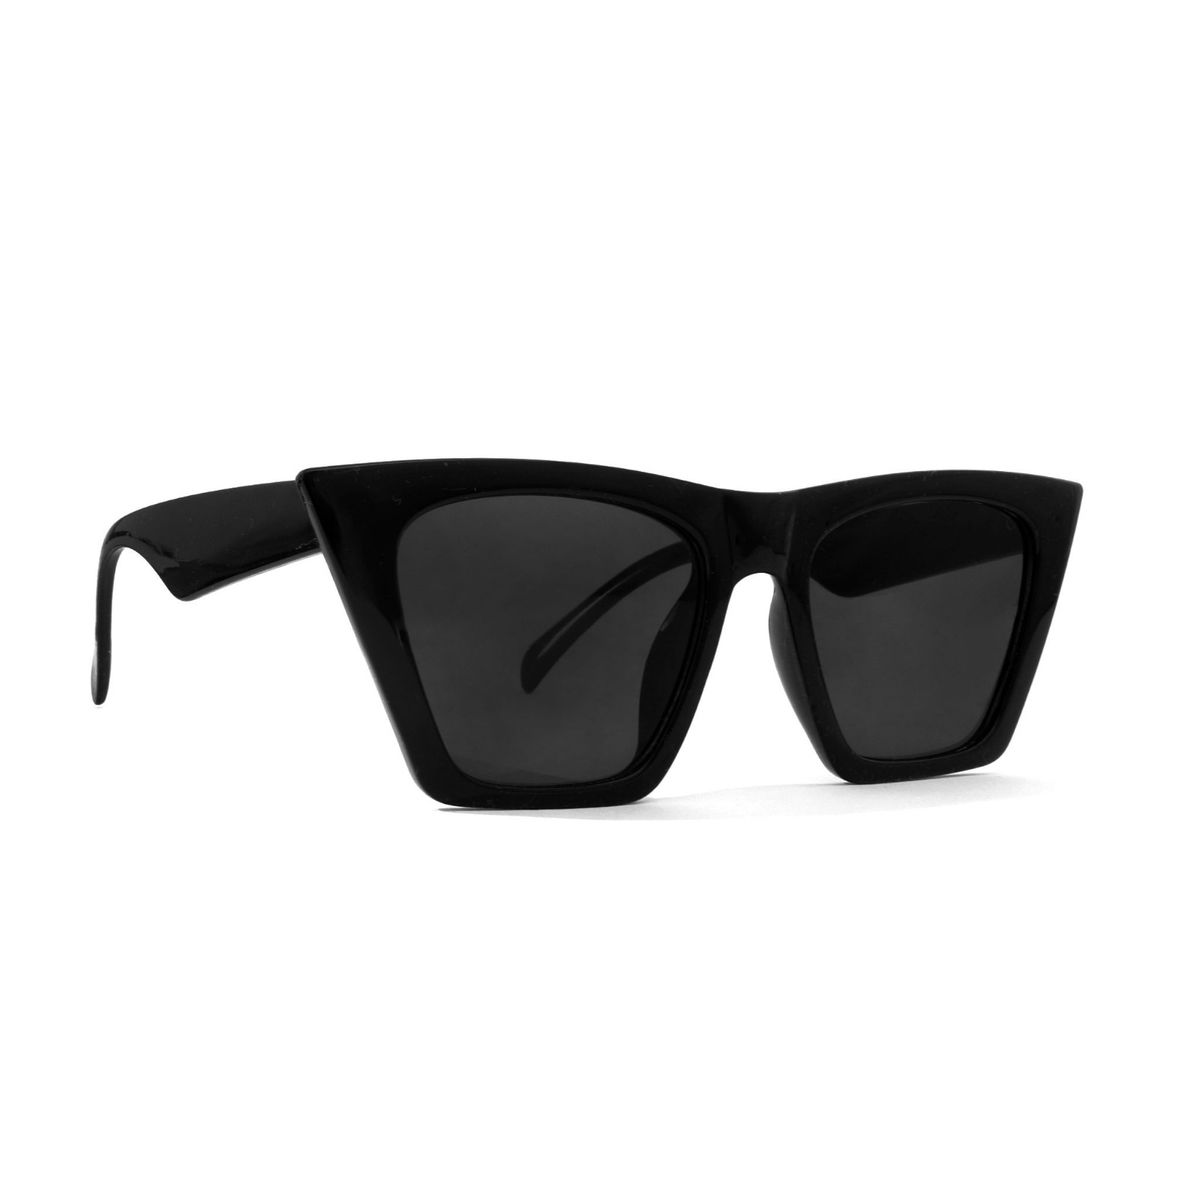 Yalli Unisex Retro Oversized Square Cateye Sunglasses For Women And Men Shop Today Get It